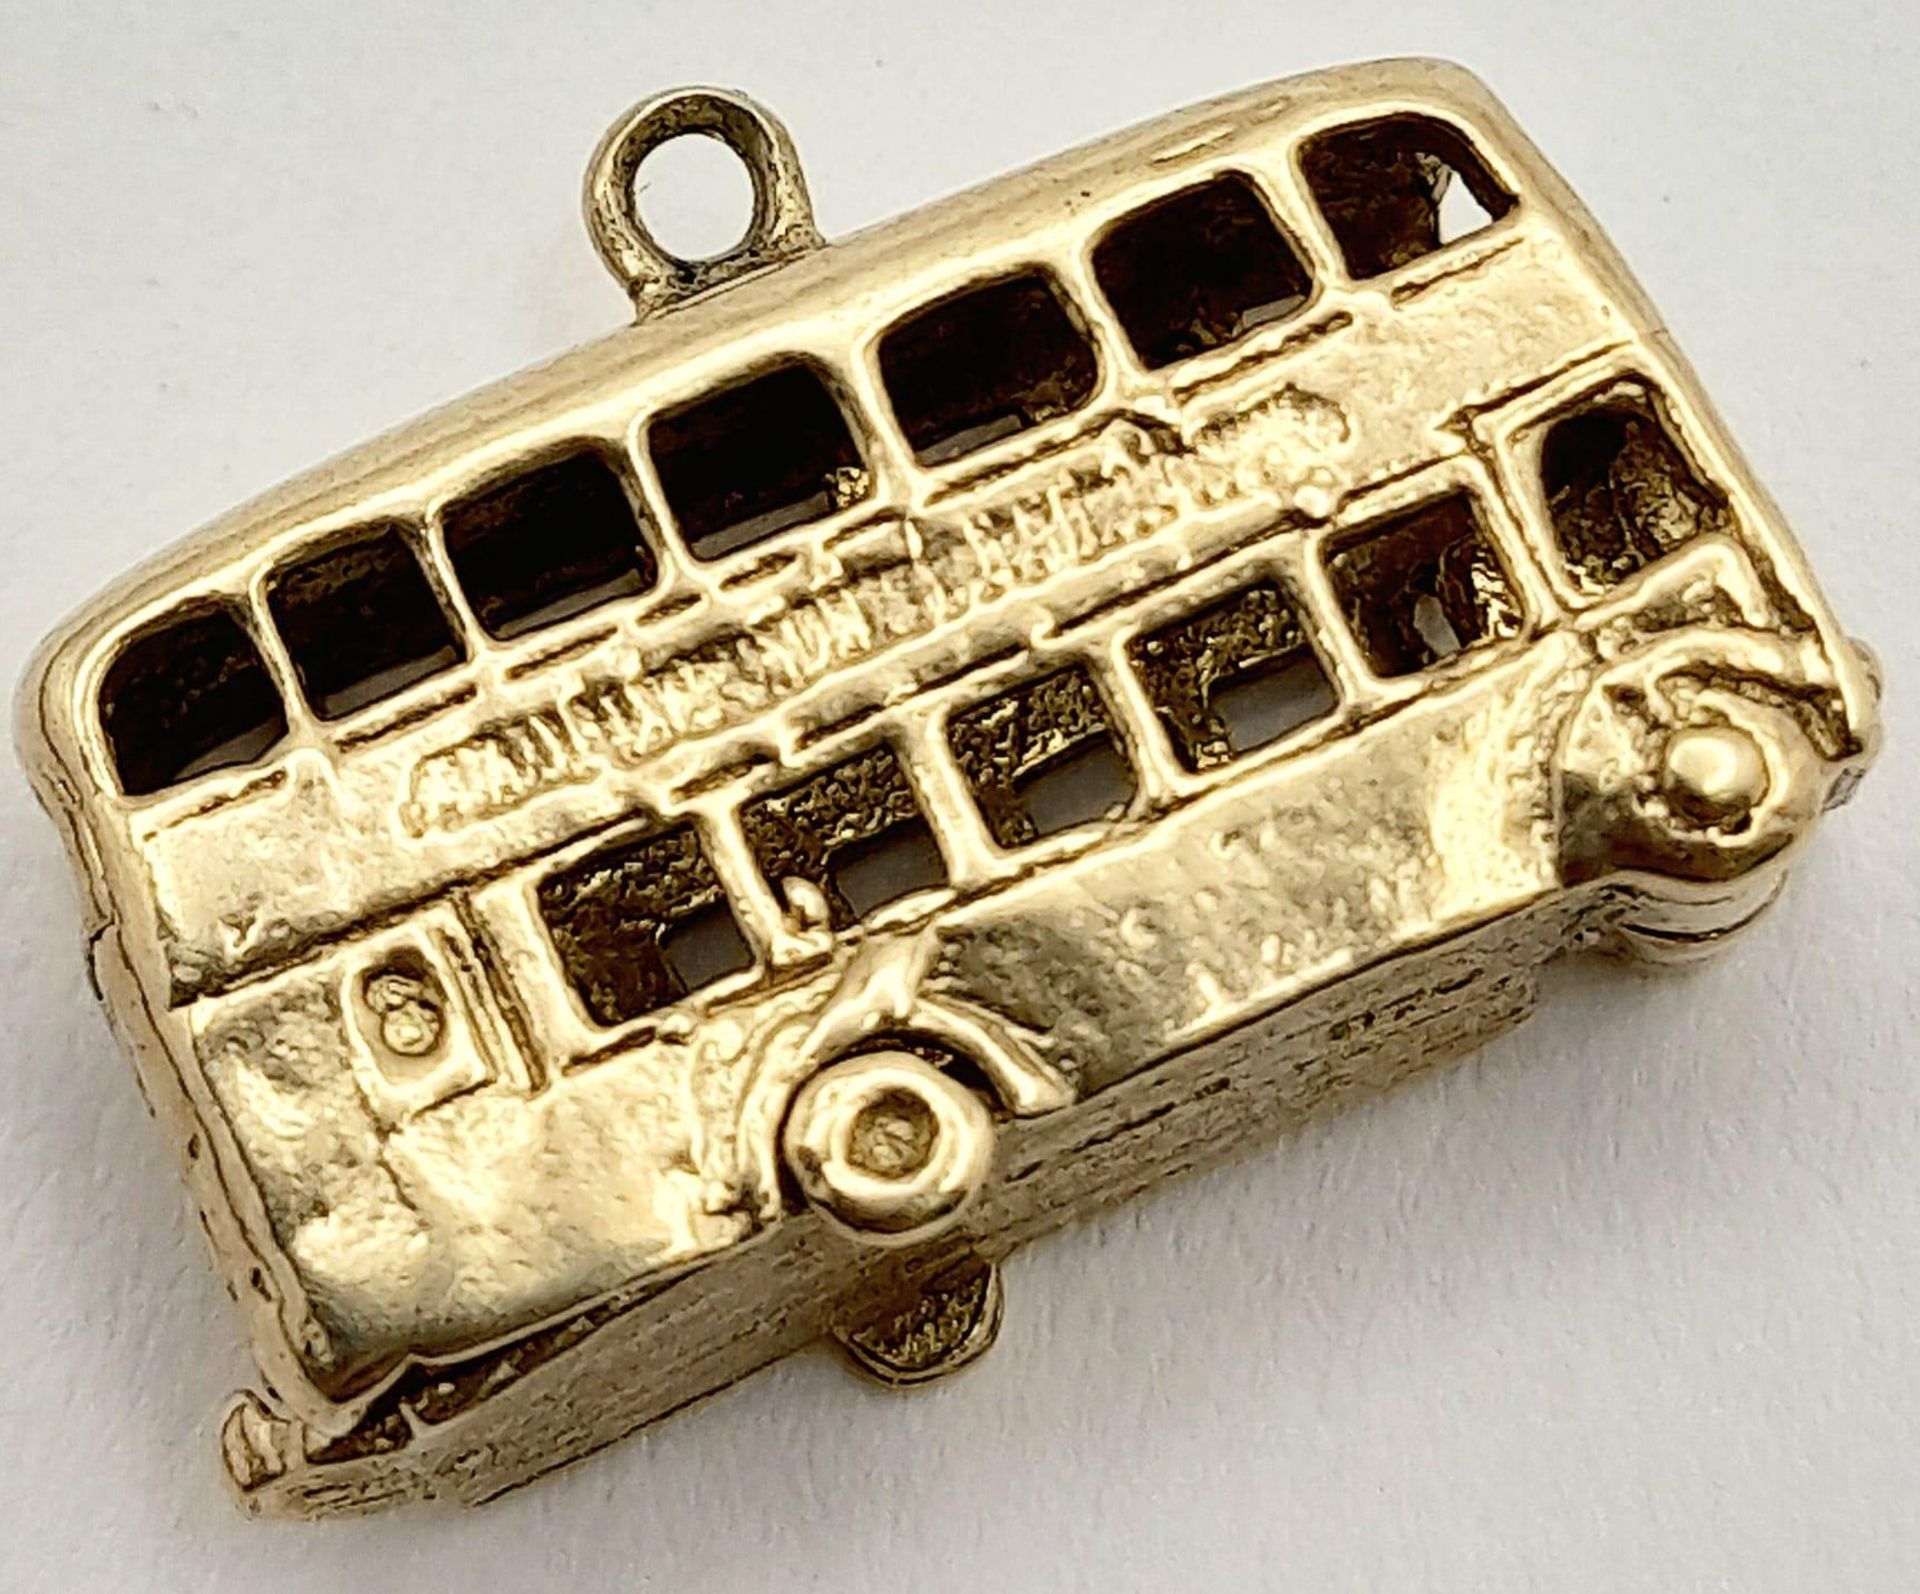 A 9K Yellow Gold London Bus Pendant/Charm. 2cm. 3.7g weight - Image 2 of 6